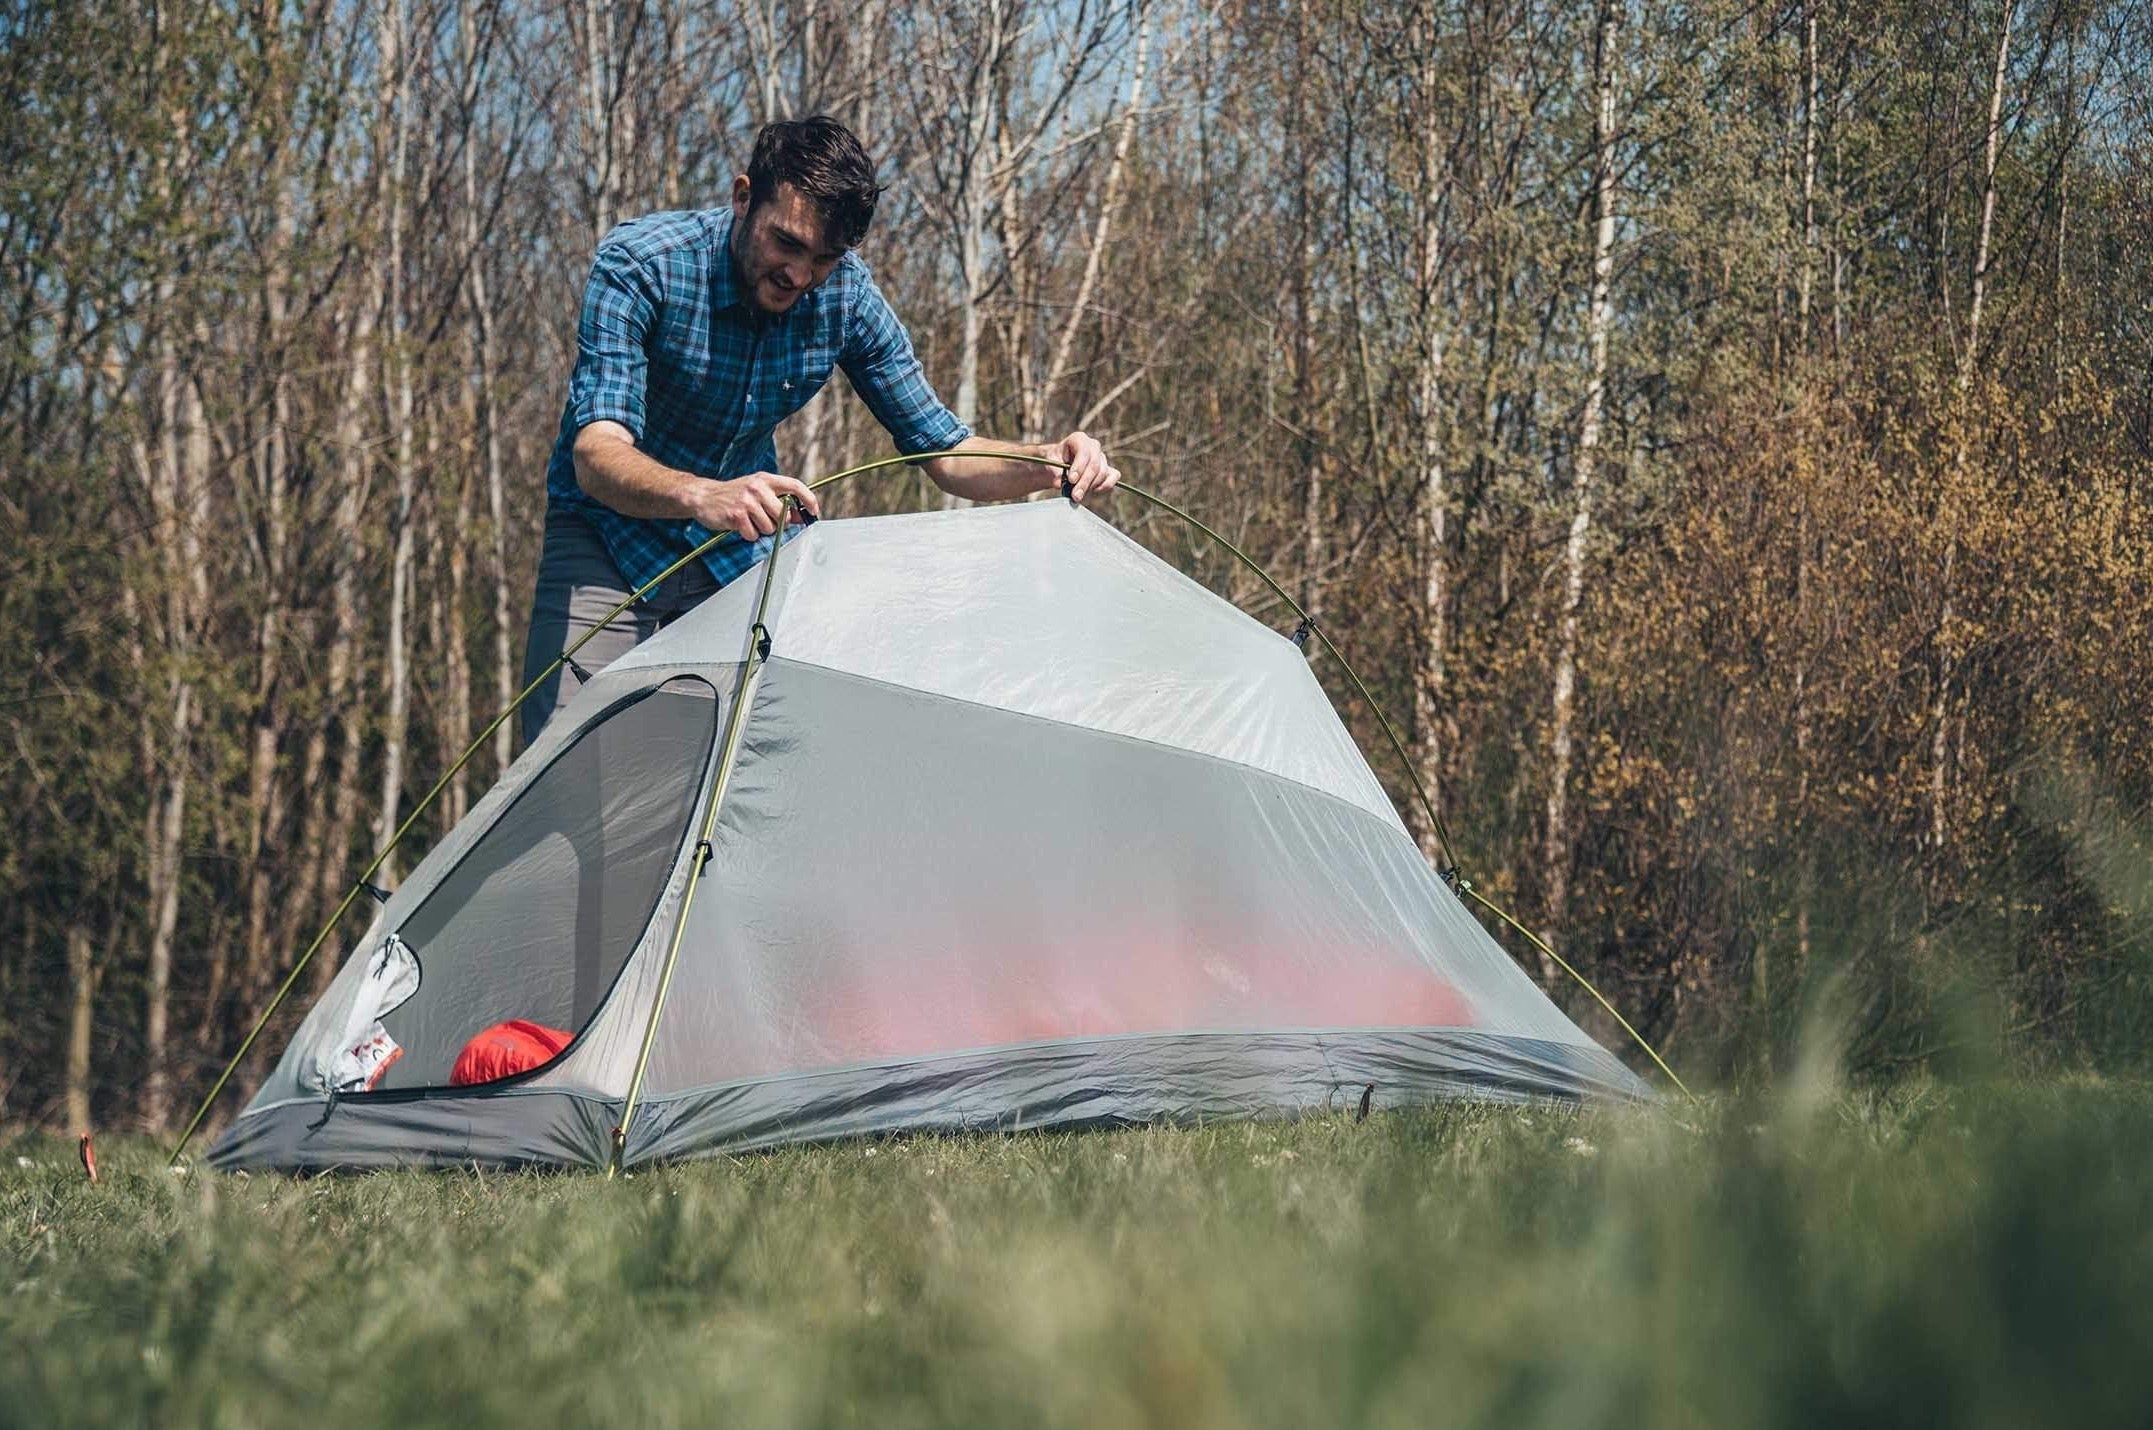 Soloist Ultralight 1-Person Backpacking Tent